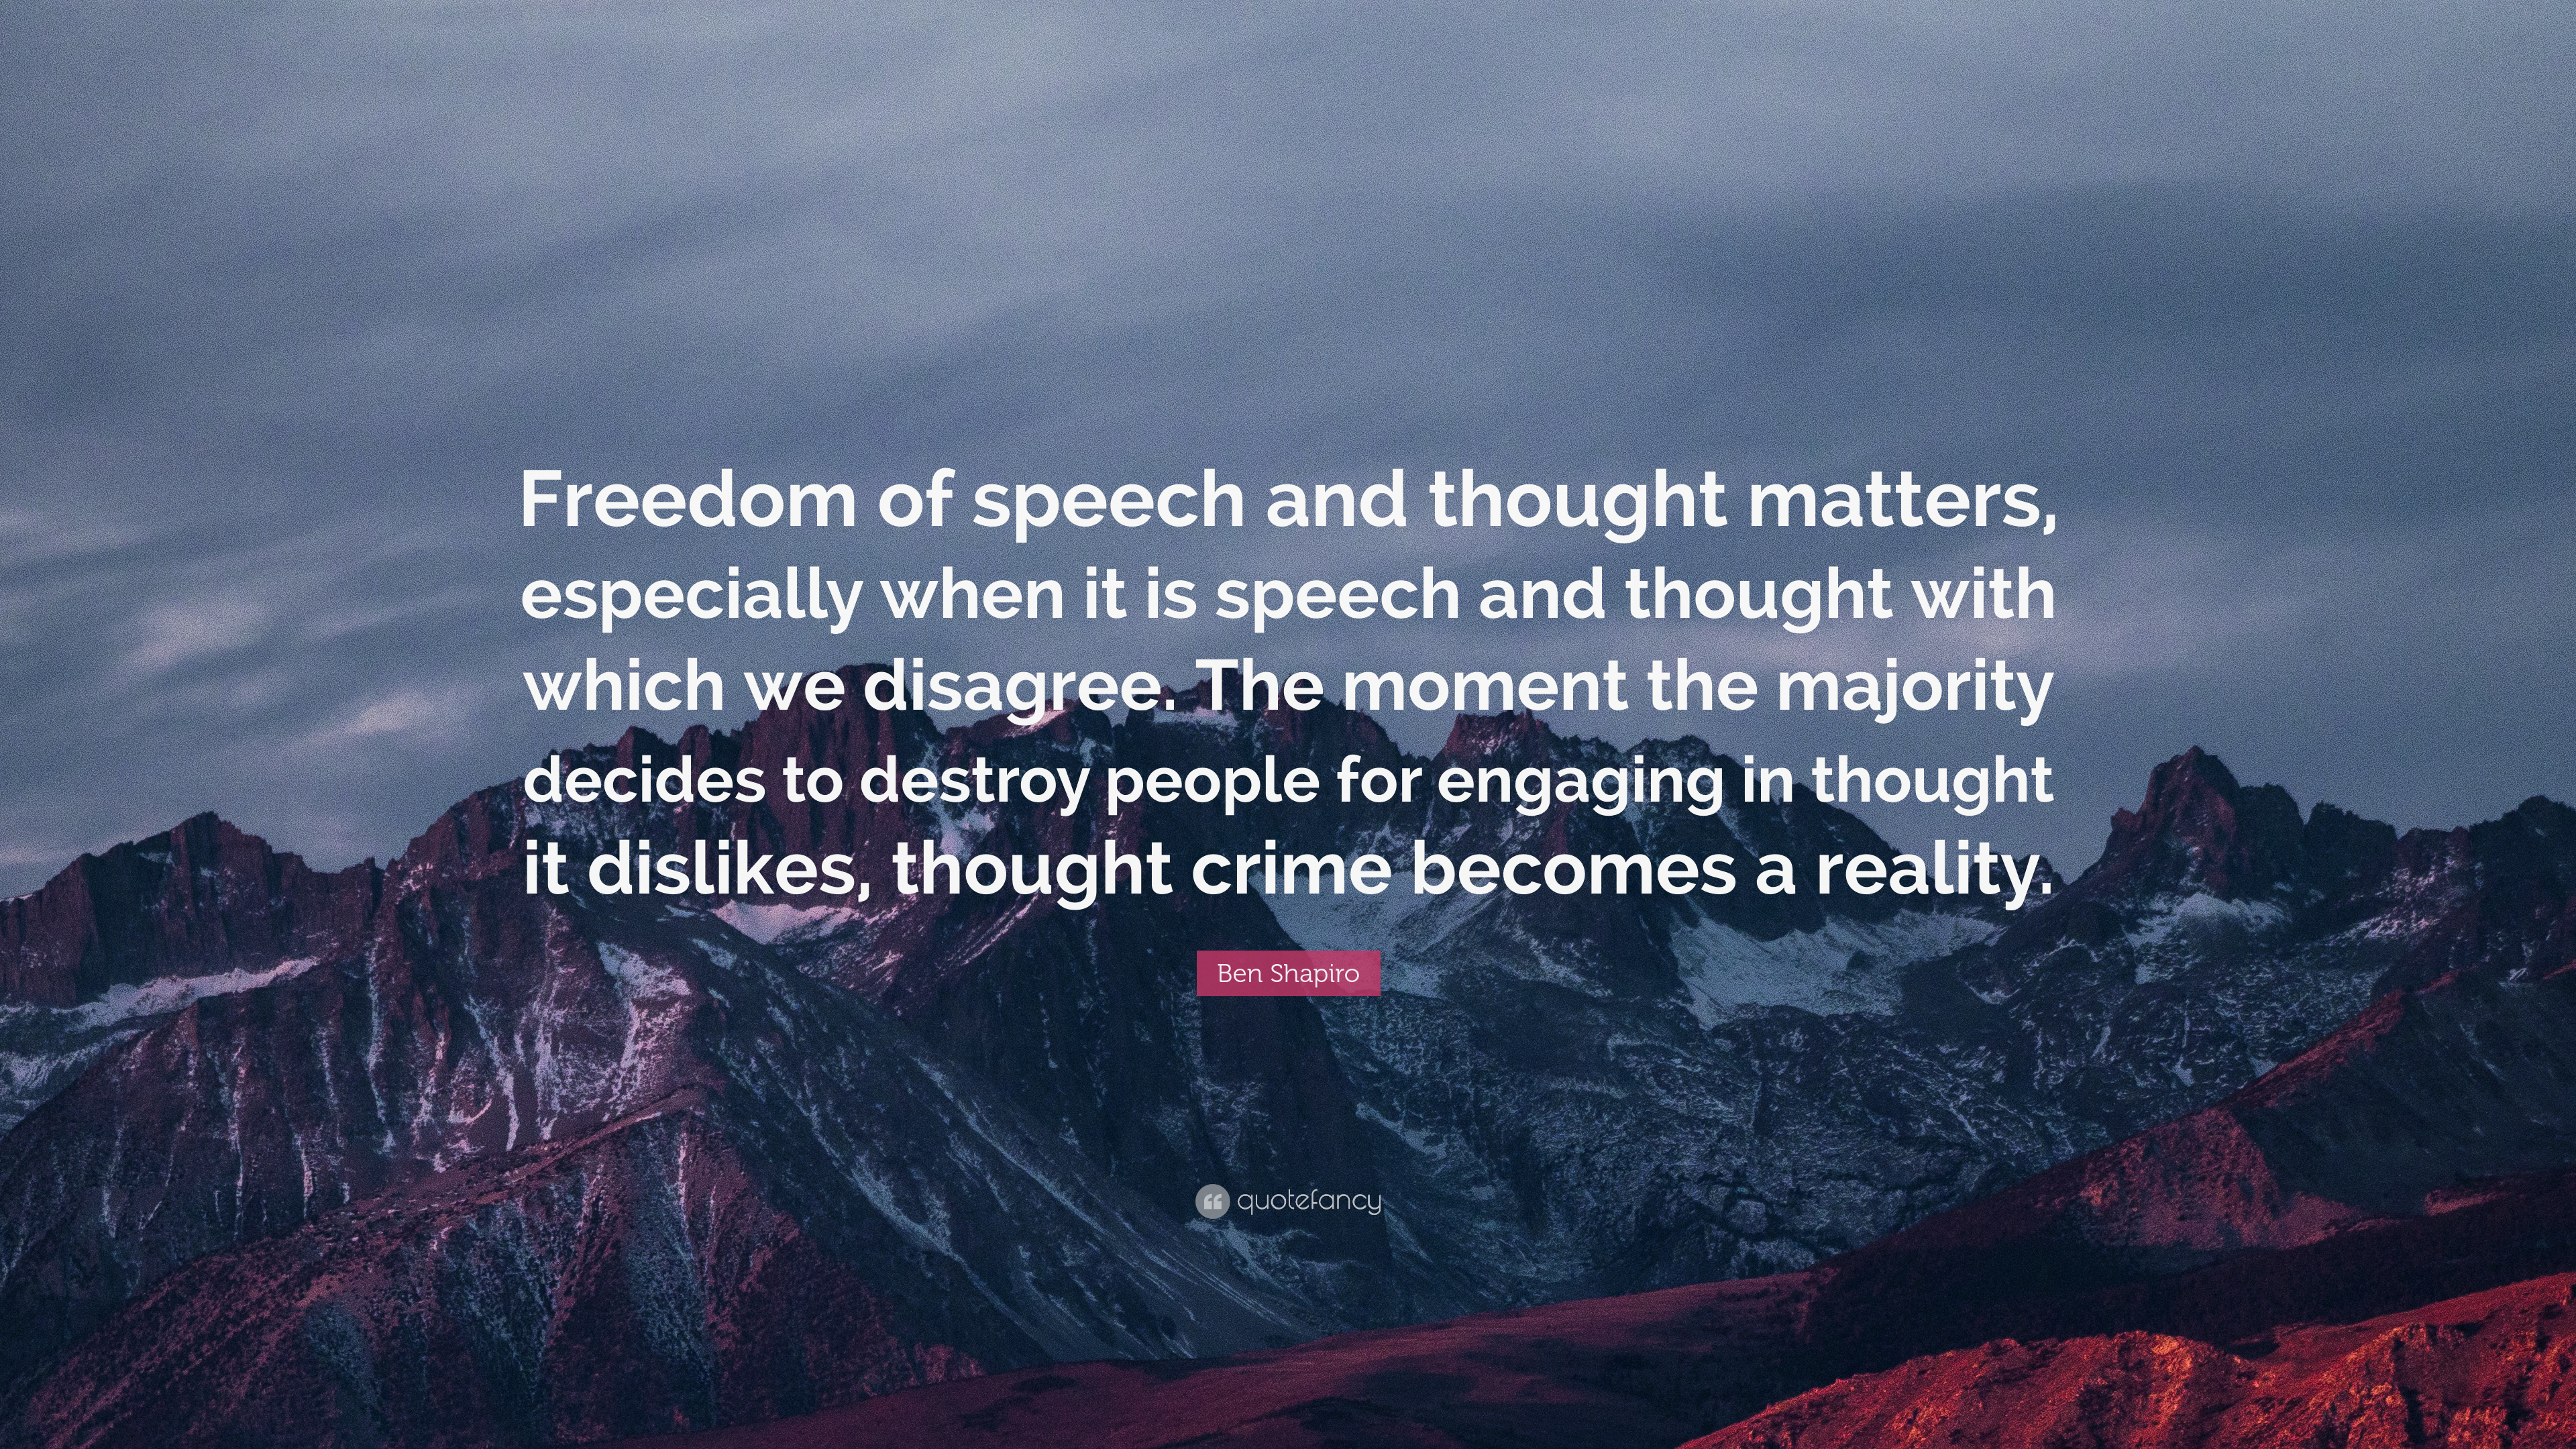 Ben Shapiro Quote: “Freedom of speech and thought matters, especially when it is speech and thought with which we disagree. The moment the m.”